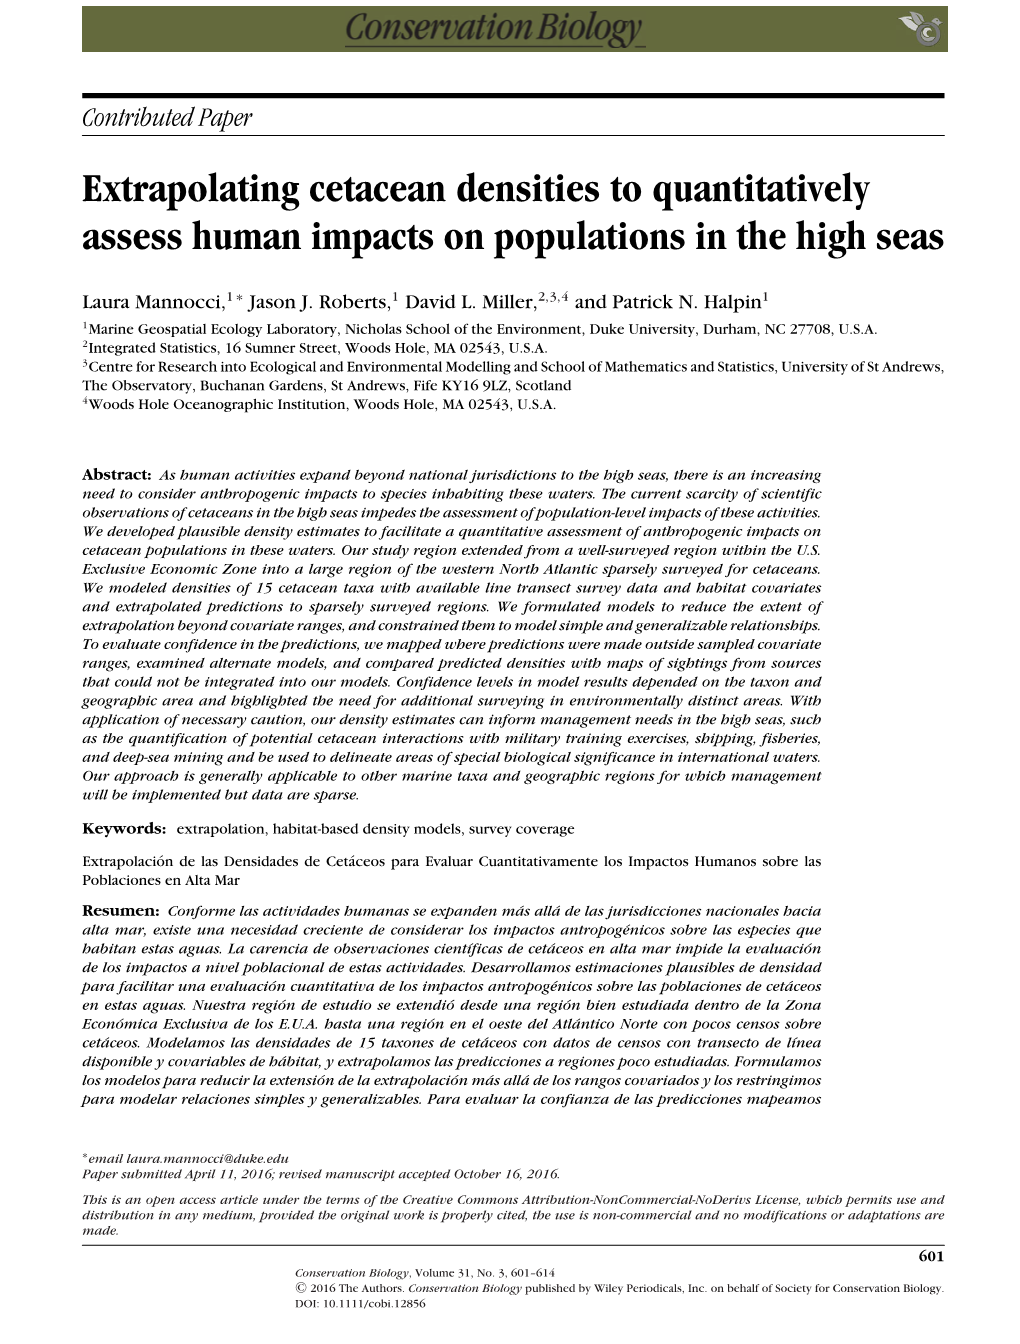 Extrapolating Cetacean Densities to Quantitatively Assess Human Impacts on Populations in the High Seas